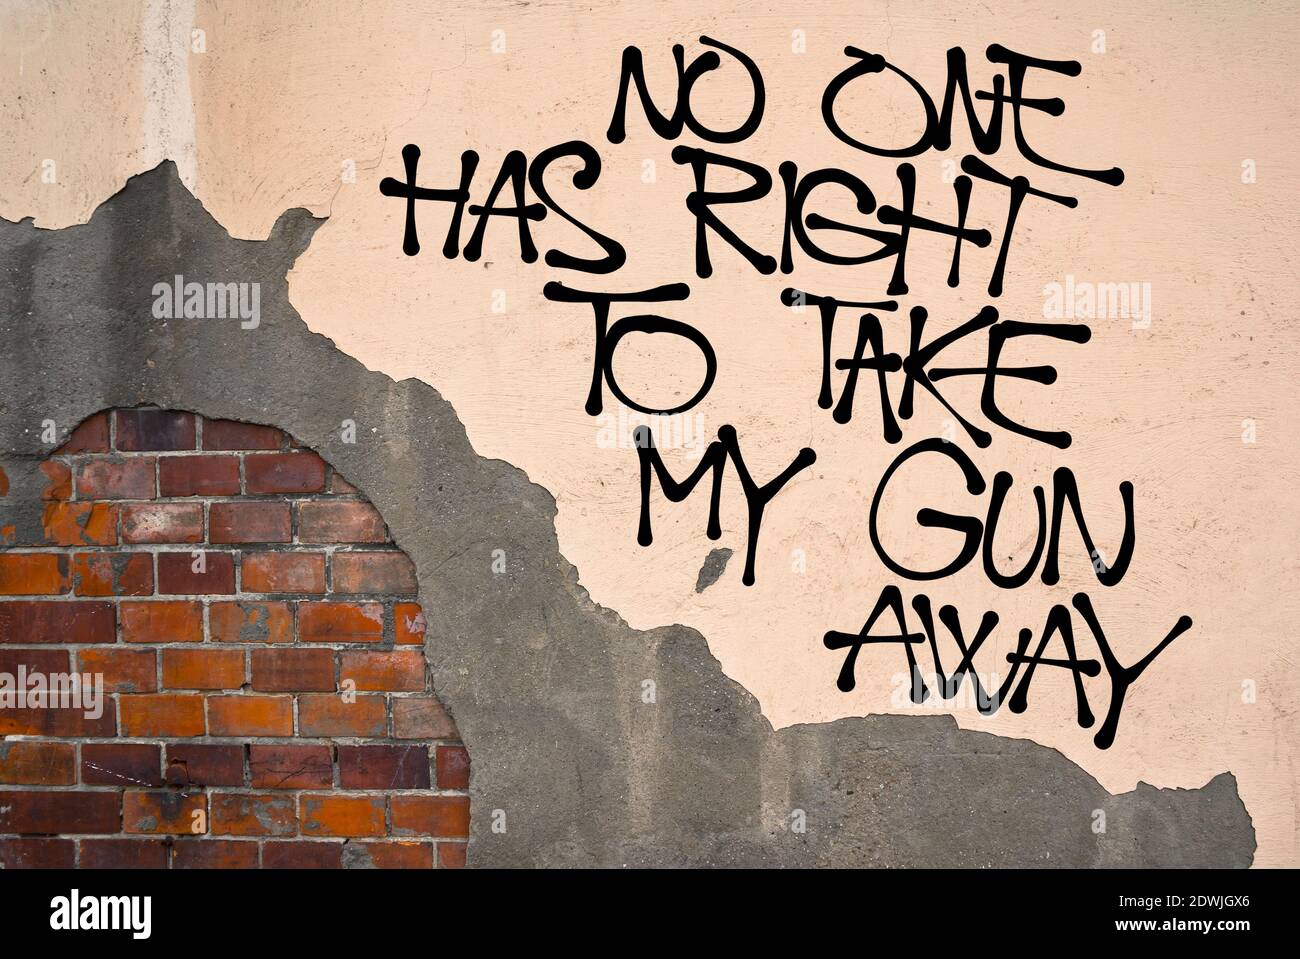 No One Has Right To Take My Gun Away - handwritten graffiti sprayed on the wall - fight against gun control and legislative restriction. Appeal to pre Stock Photo